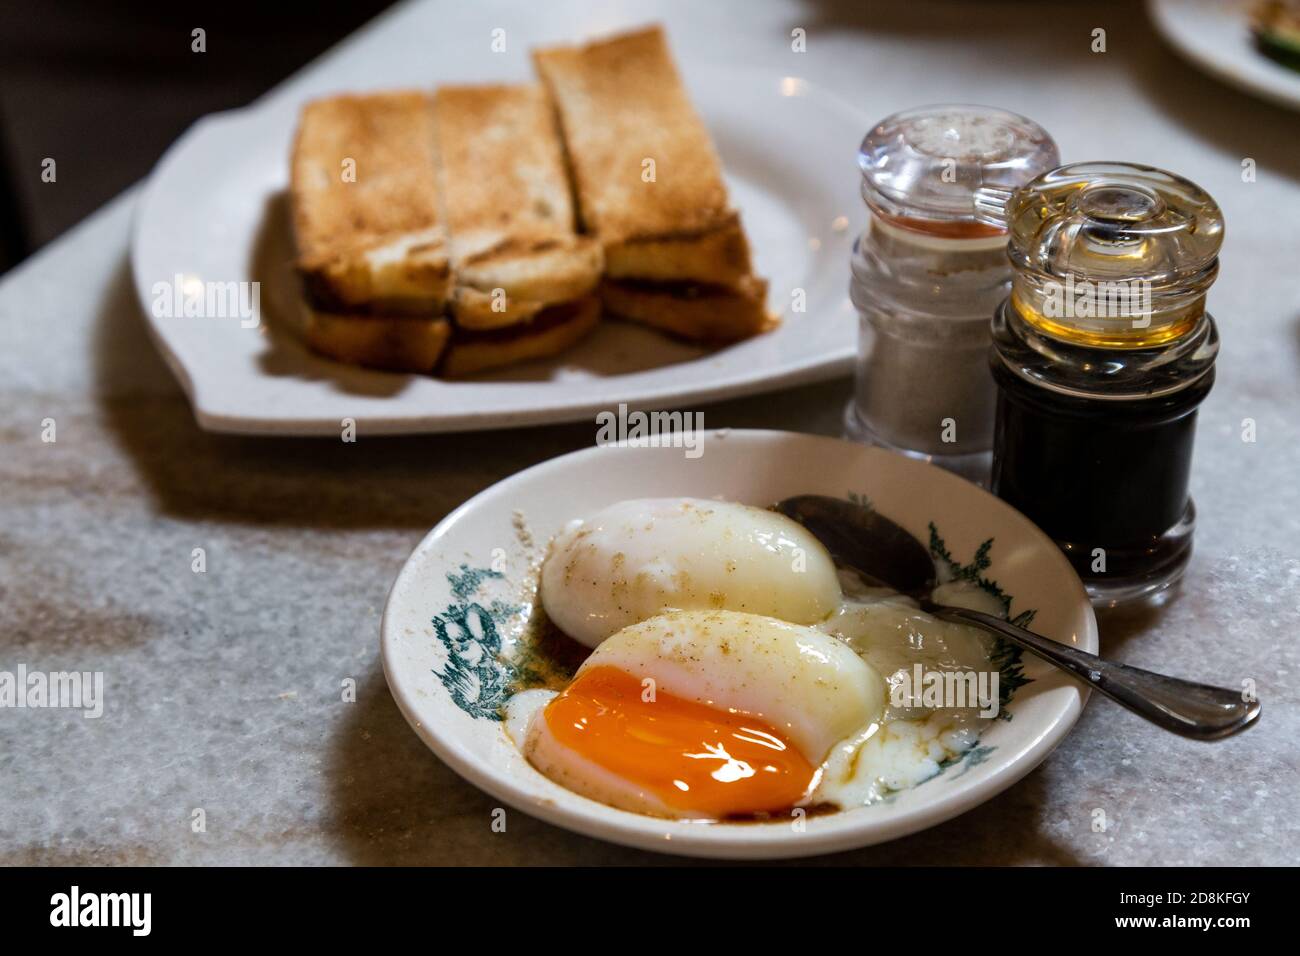 Half boiled eggs, coffee, toast bread, popular Chinese style breakfast in Malaysia Stock Photo